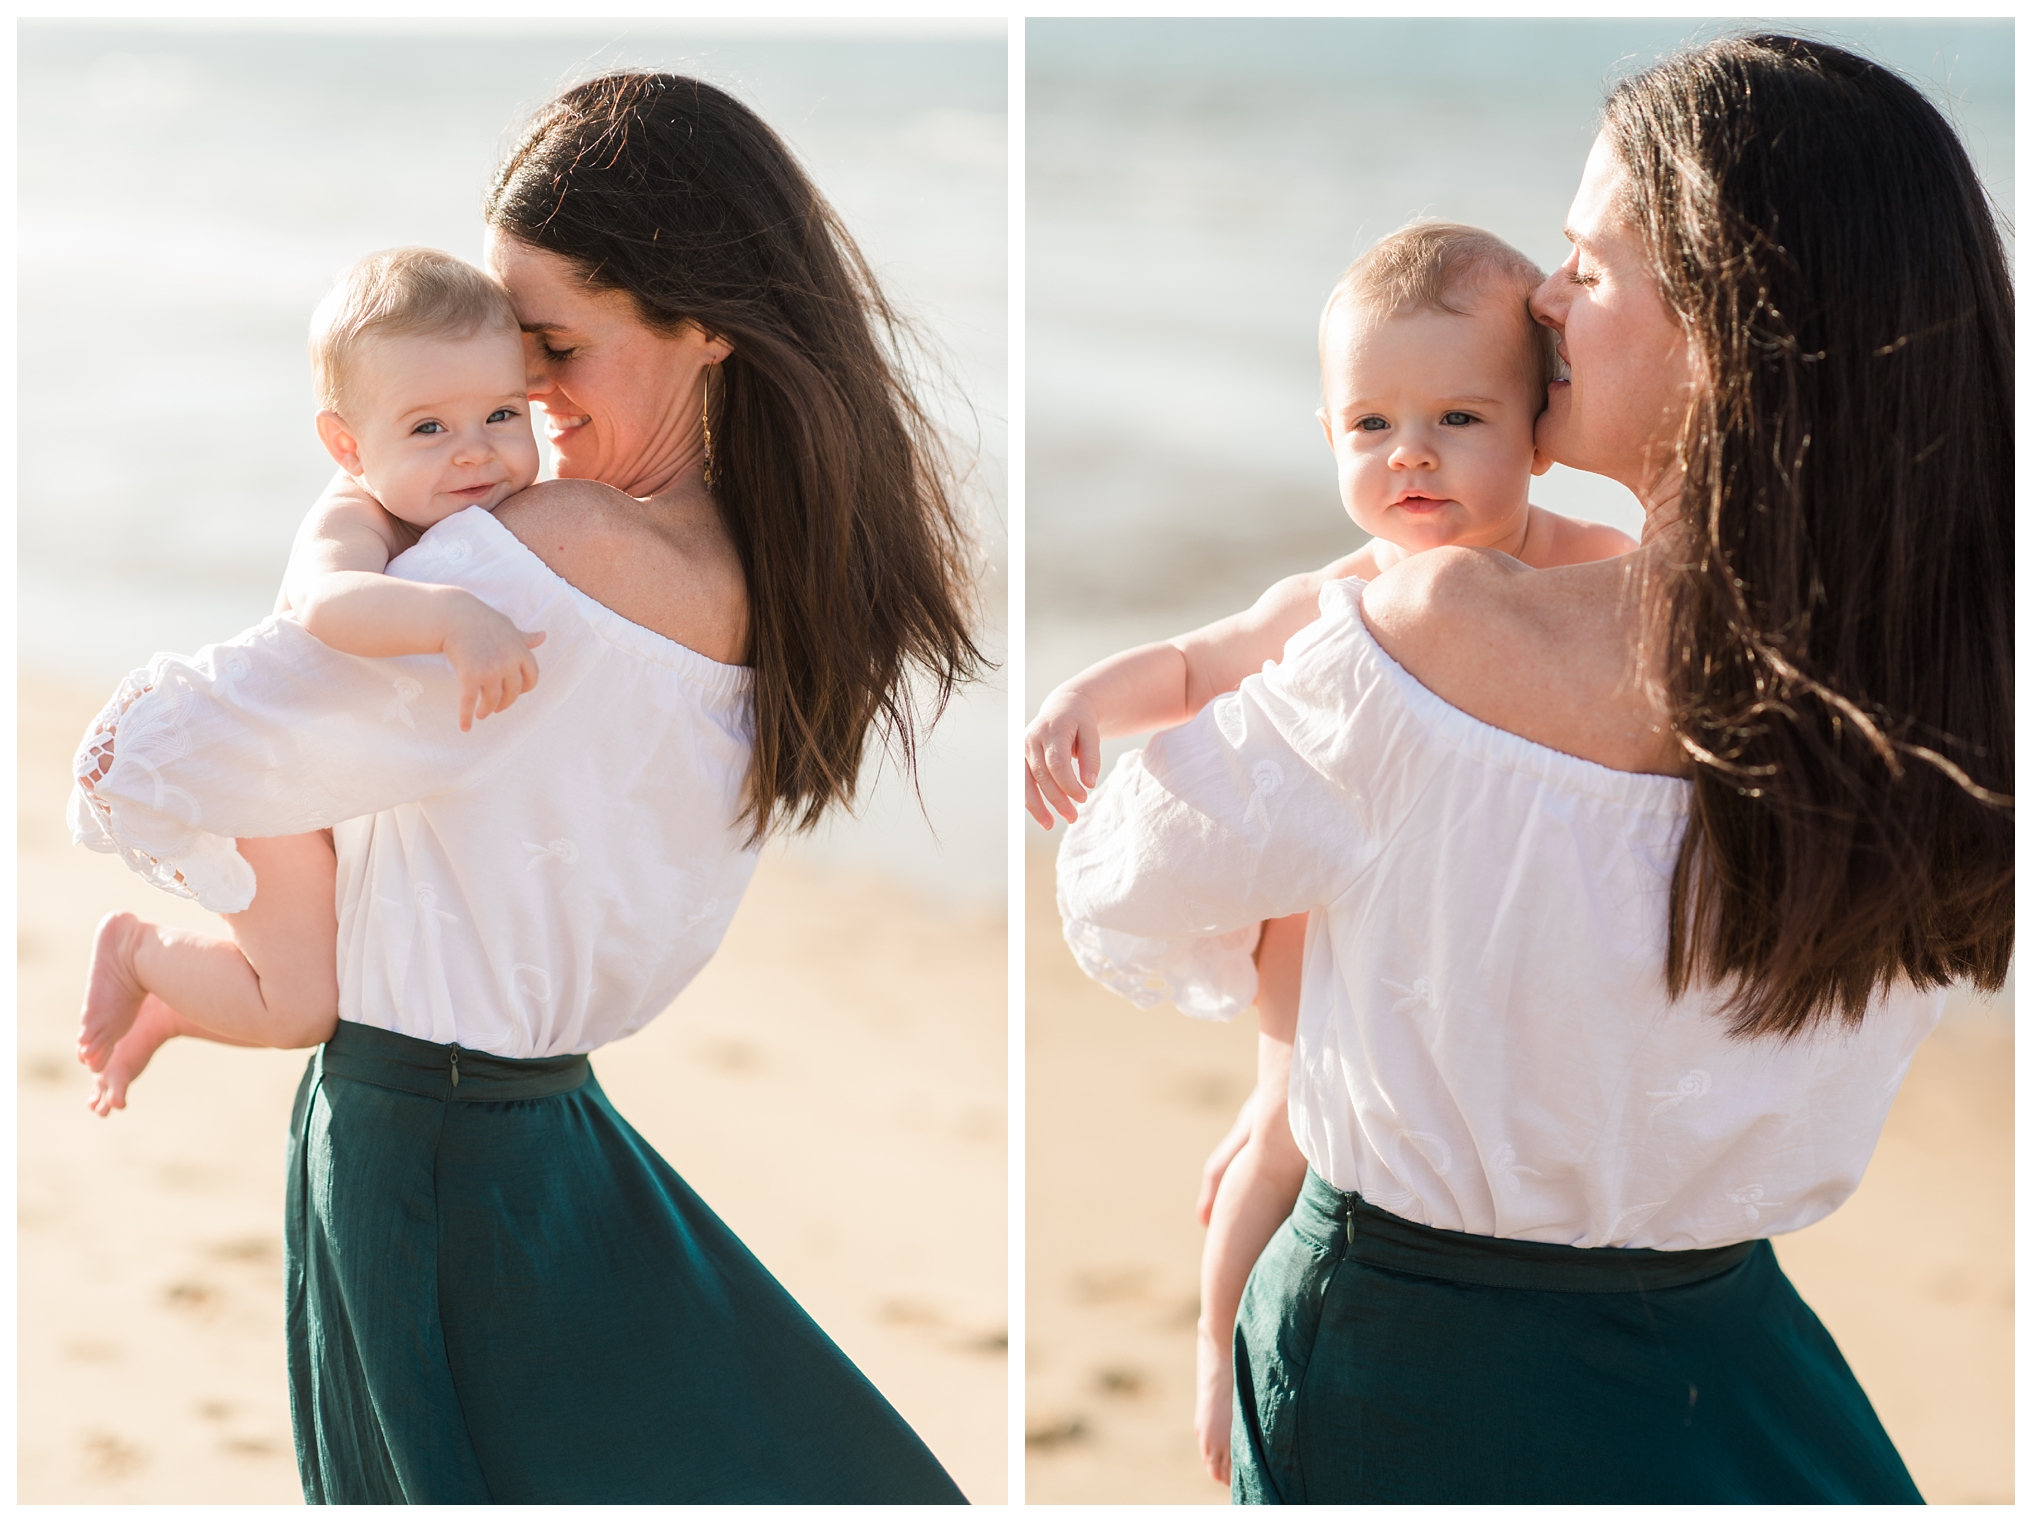 15 Creative Mommy and Me PhotoShoot ideas & Poses